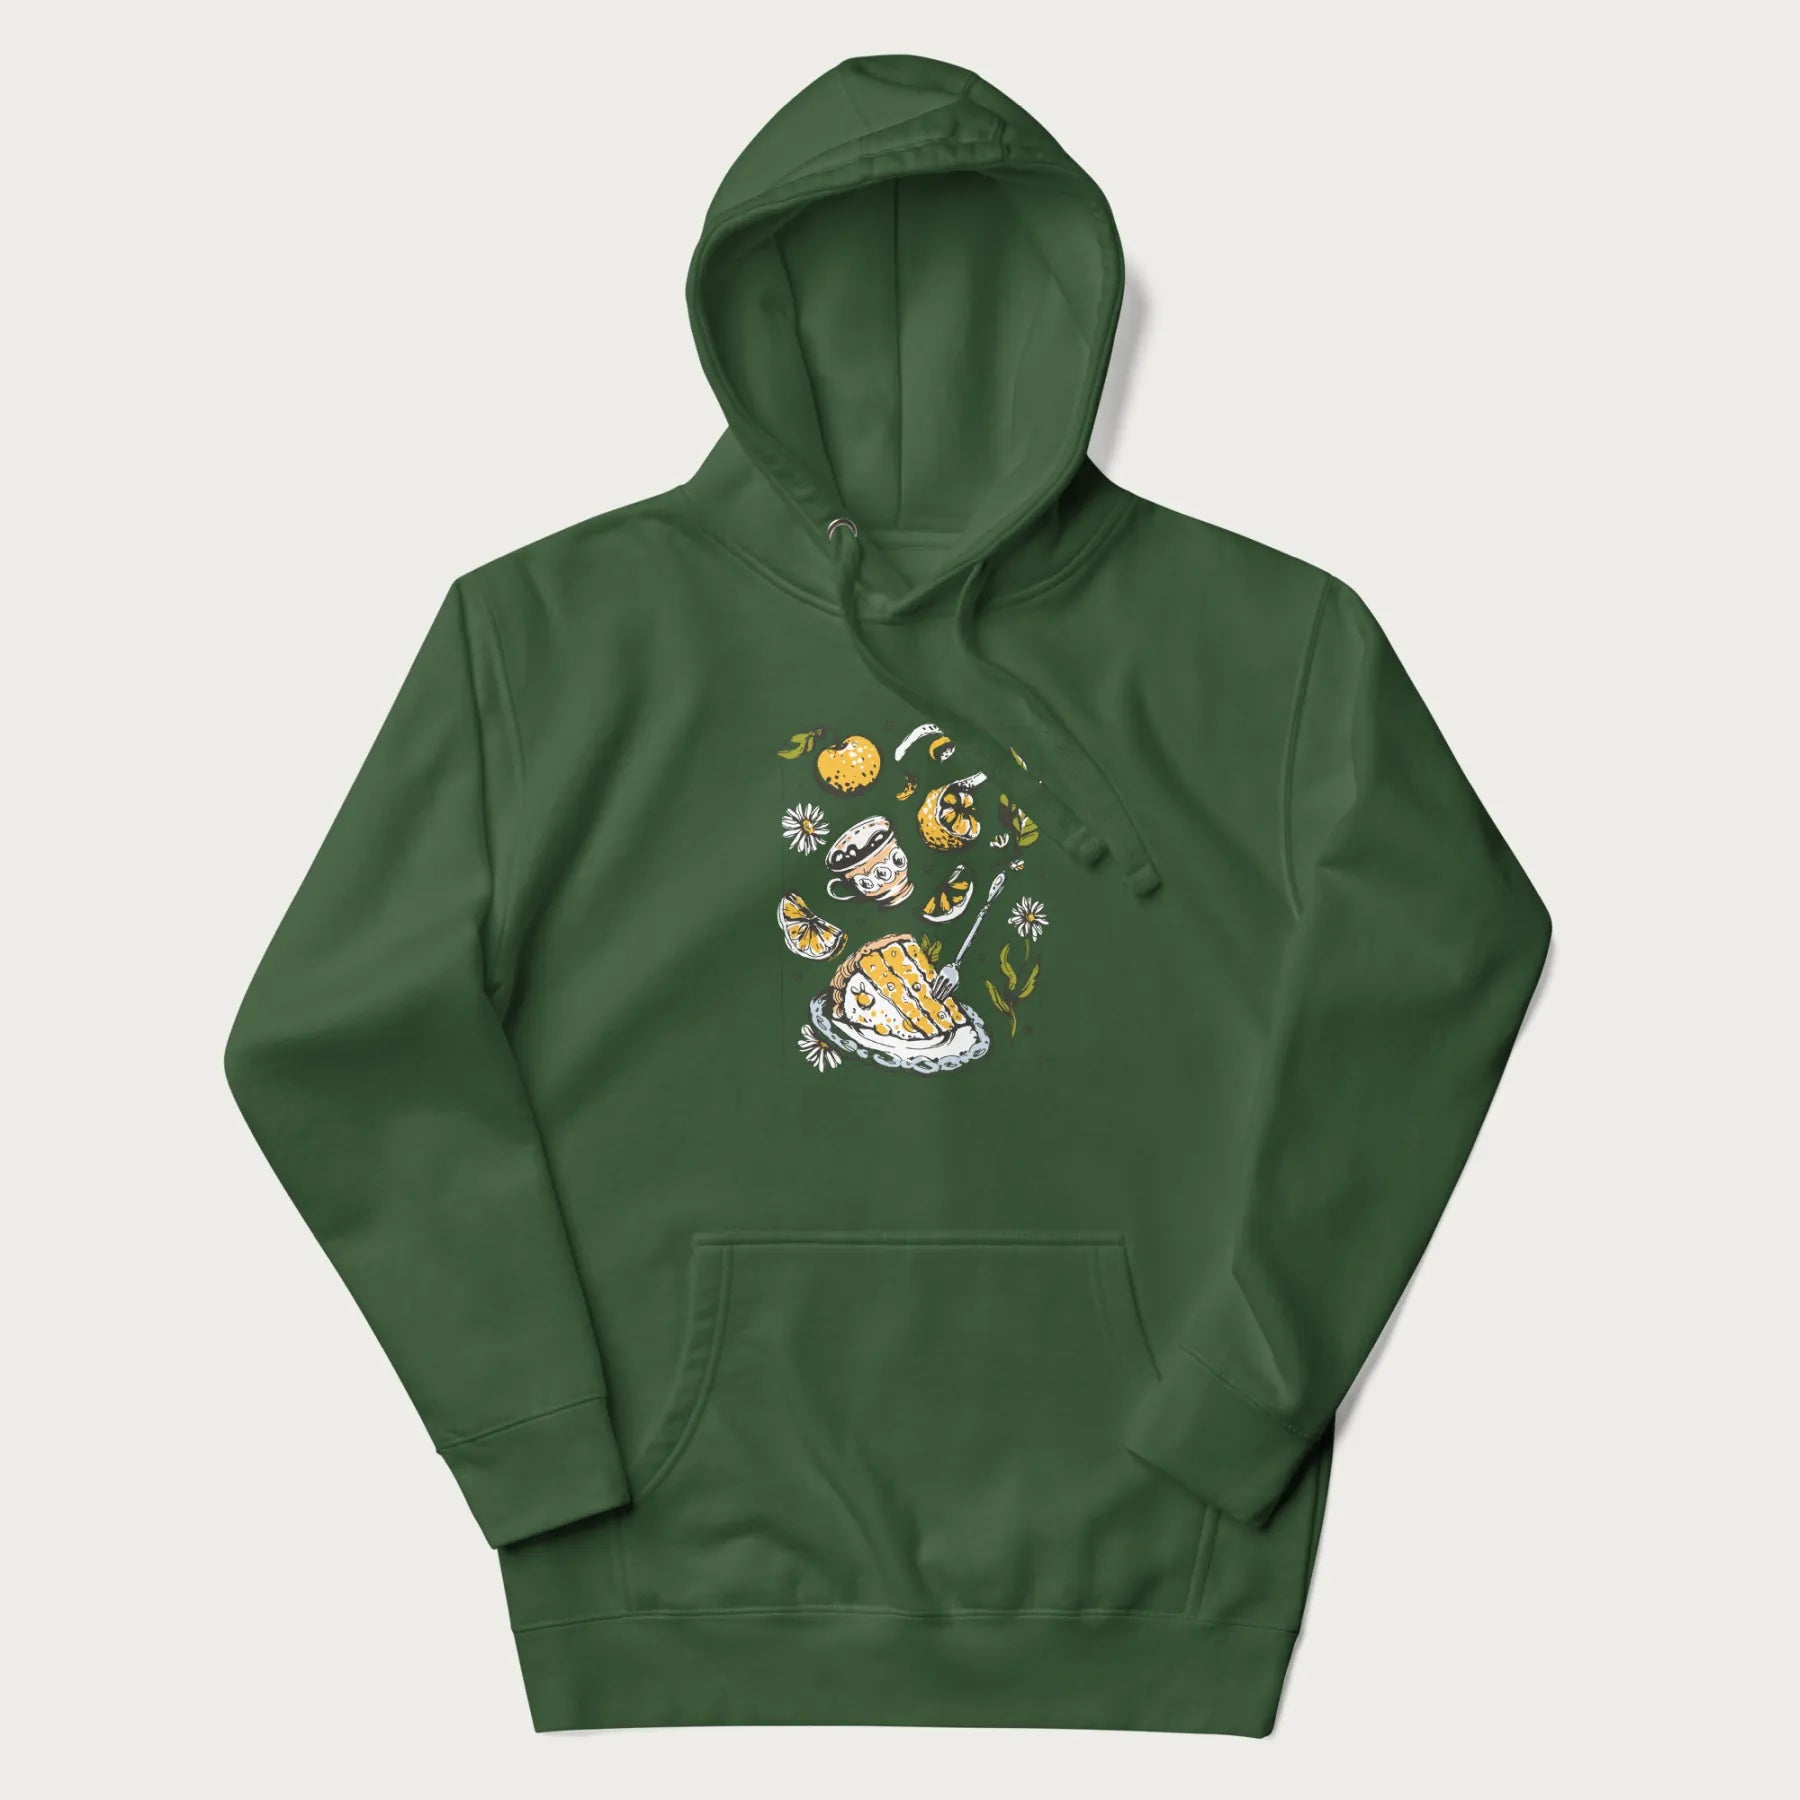 Forest green hoodie featuring a Cottagecore-themed graphic with oranges, a floral porcelain cup, orange pie, and daisies.